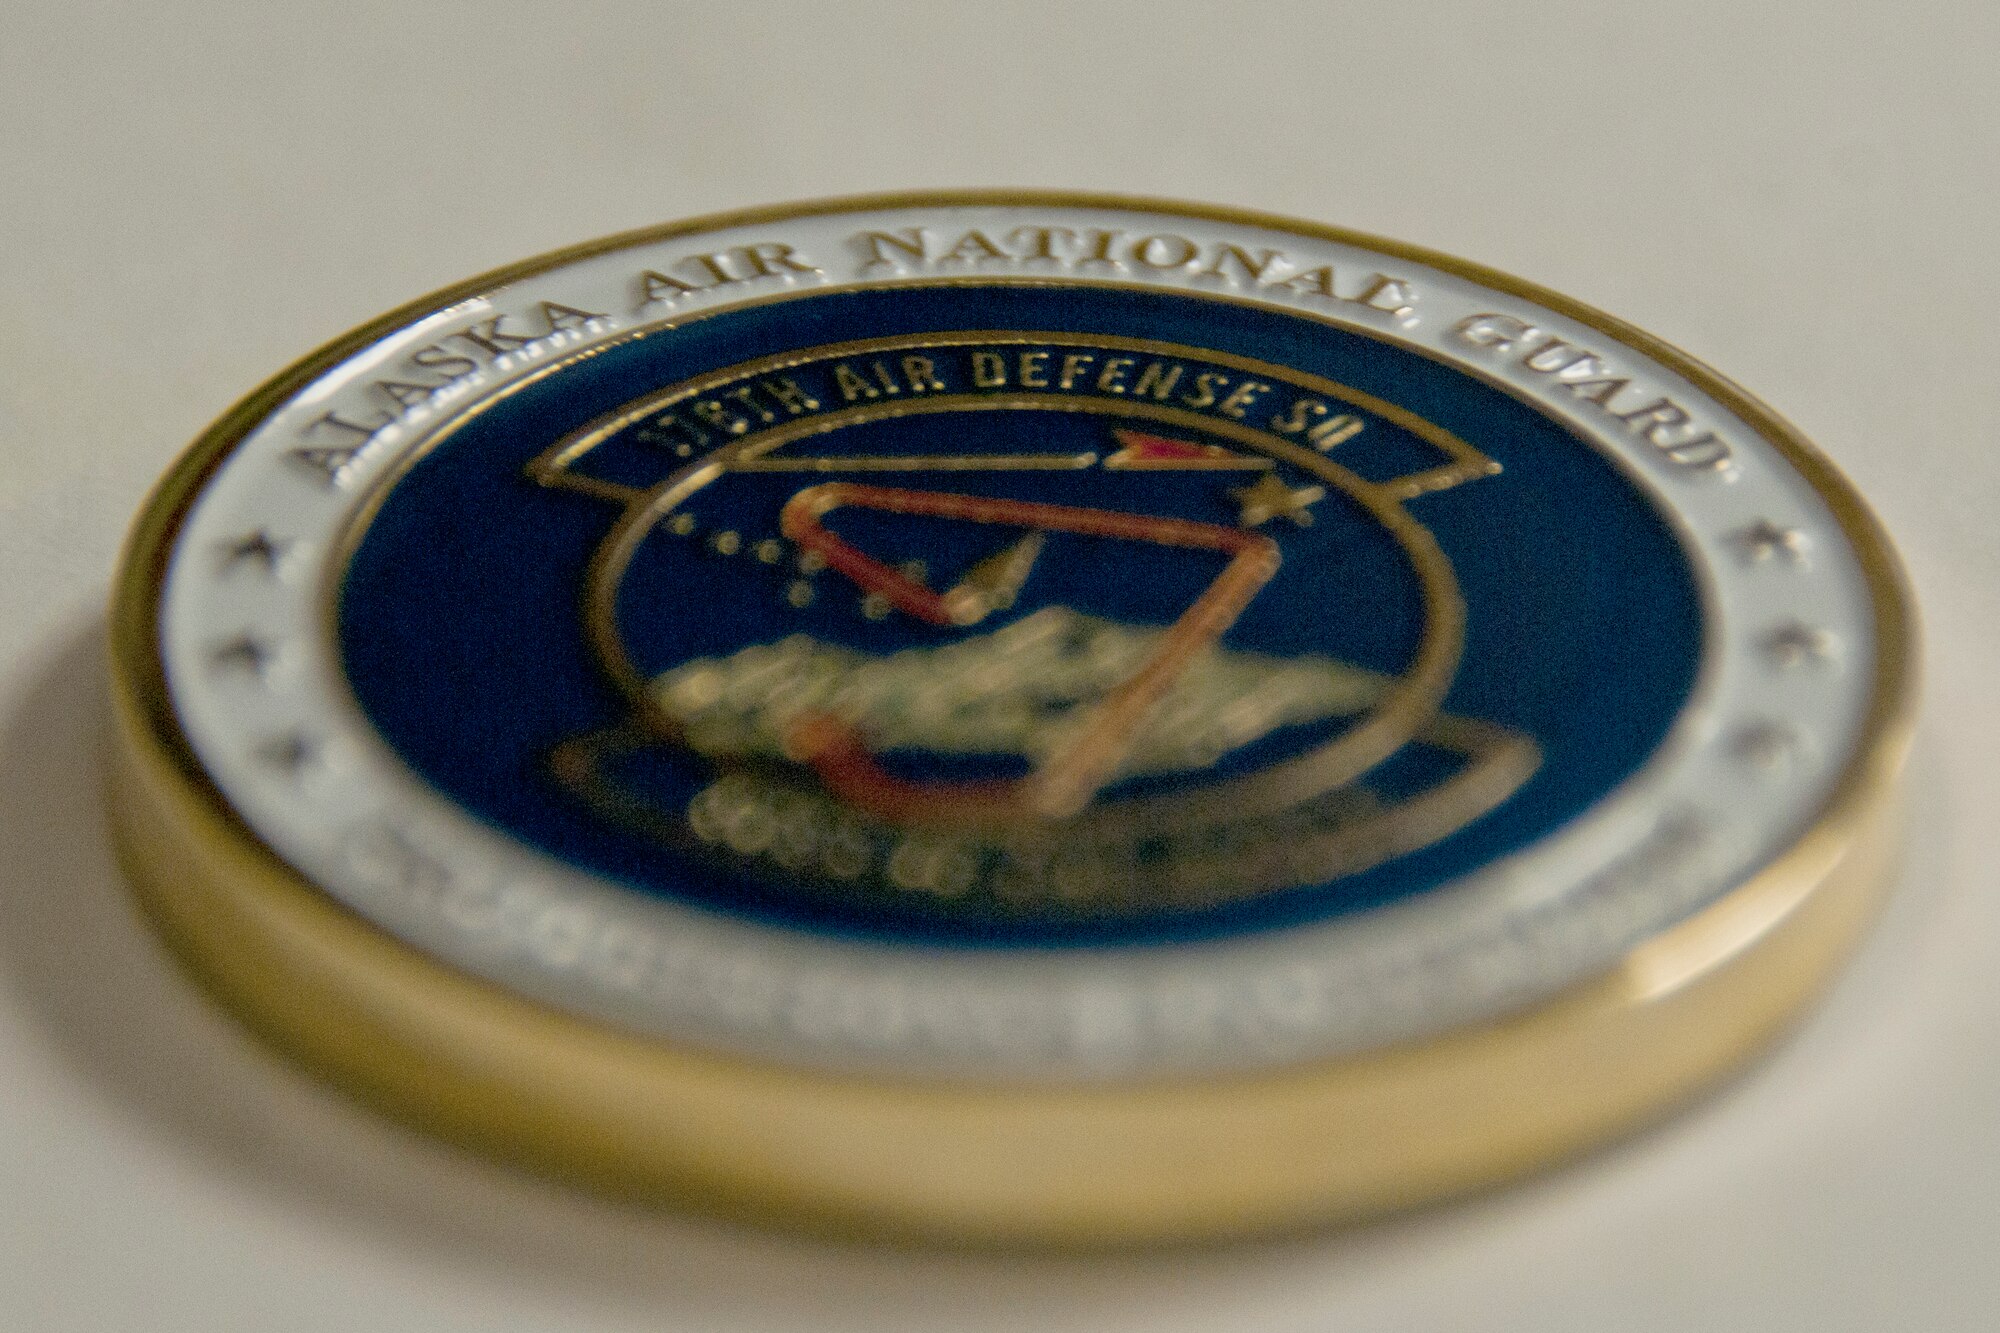 JOINT BASE ELMENDORF-RICHARDSON, Alaska -- Displayed is a new 176th Air Defense Squadron coin. The 176th Air Control Squadron was re-designated to the 176th Air Defense Squadron during a ceremony here Aug. 3. U.S. National Guard photo by Staff Sgt N. Alicia Halla/ Released